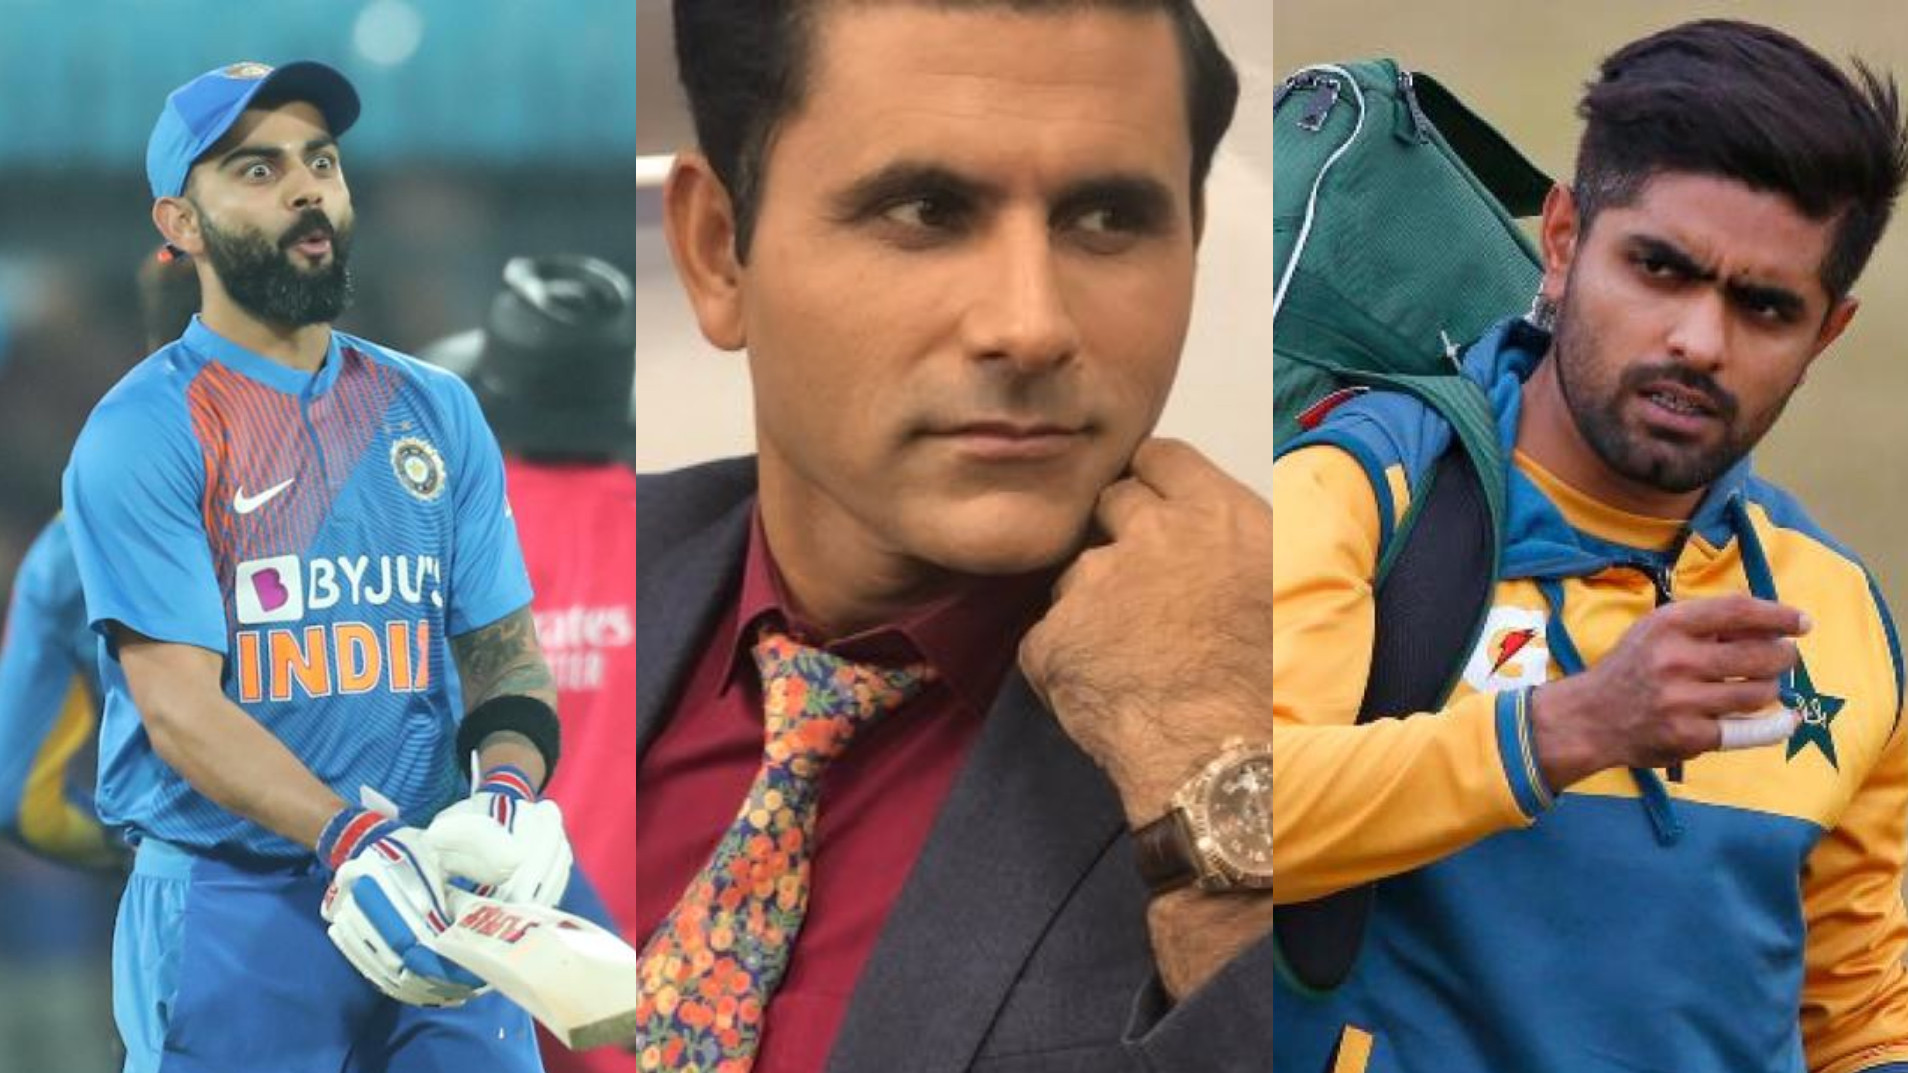 WATCH: One shouldn't compare Indian players with Pakistani players because 